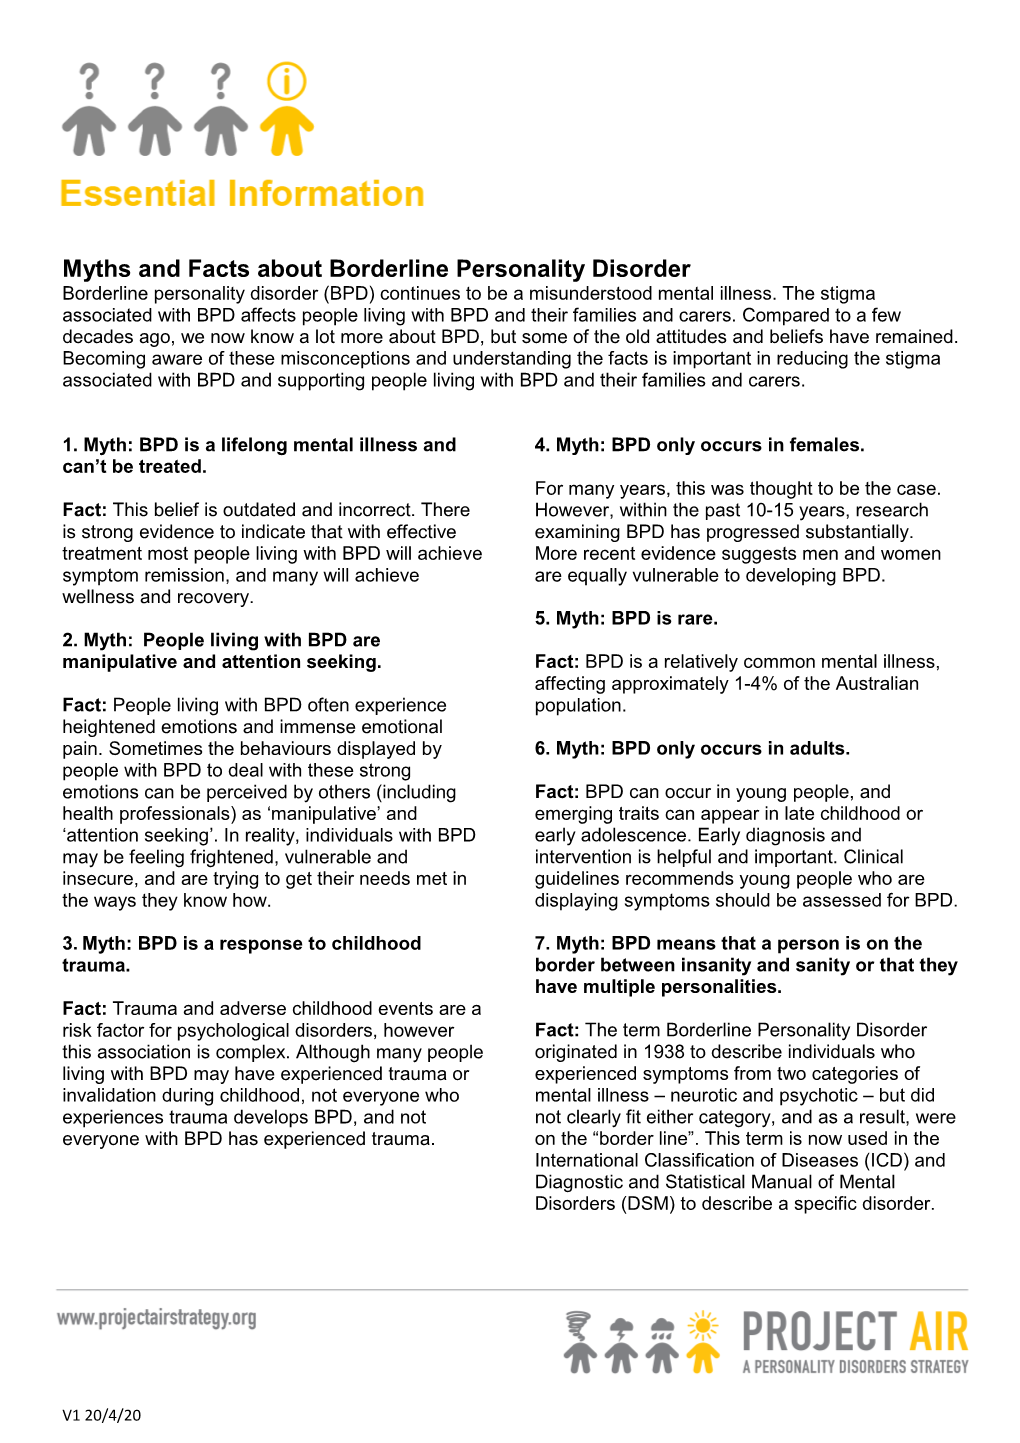 Myths and Facts About Borderline Personality Disorder Borderline Personality Disorder (BPD) Continues to Be a Misunderstood Mental Illness